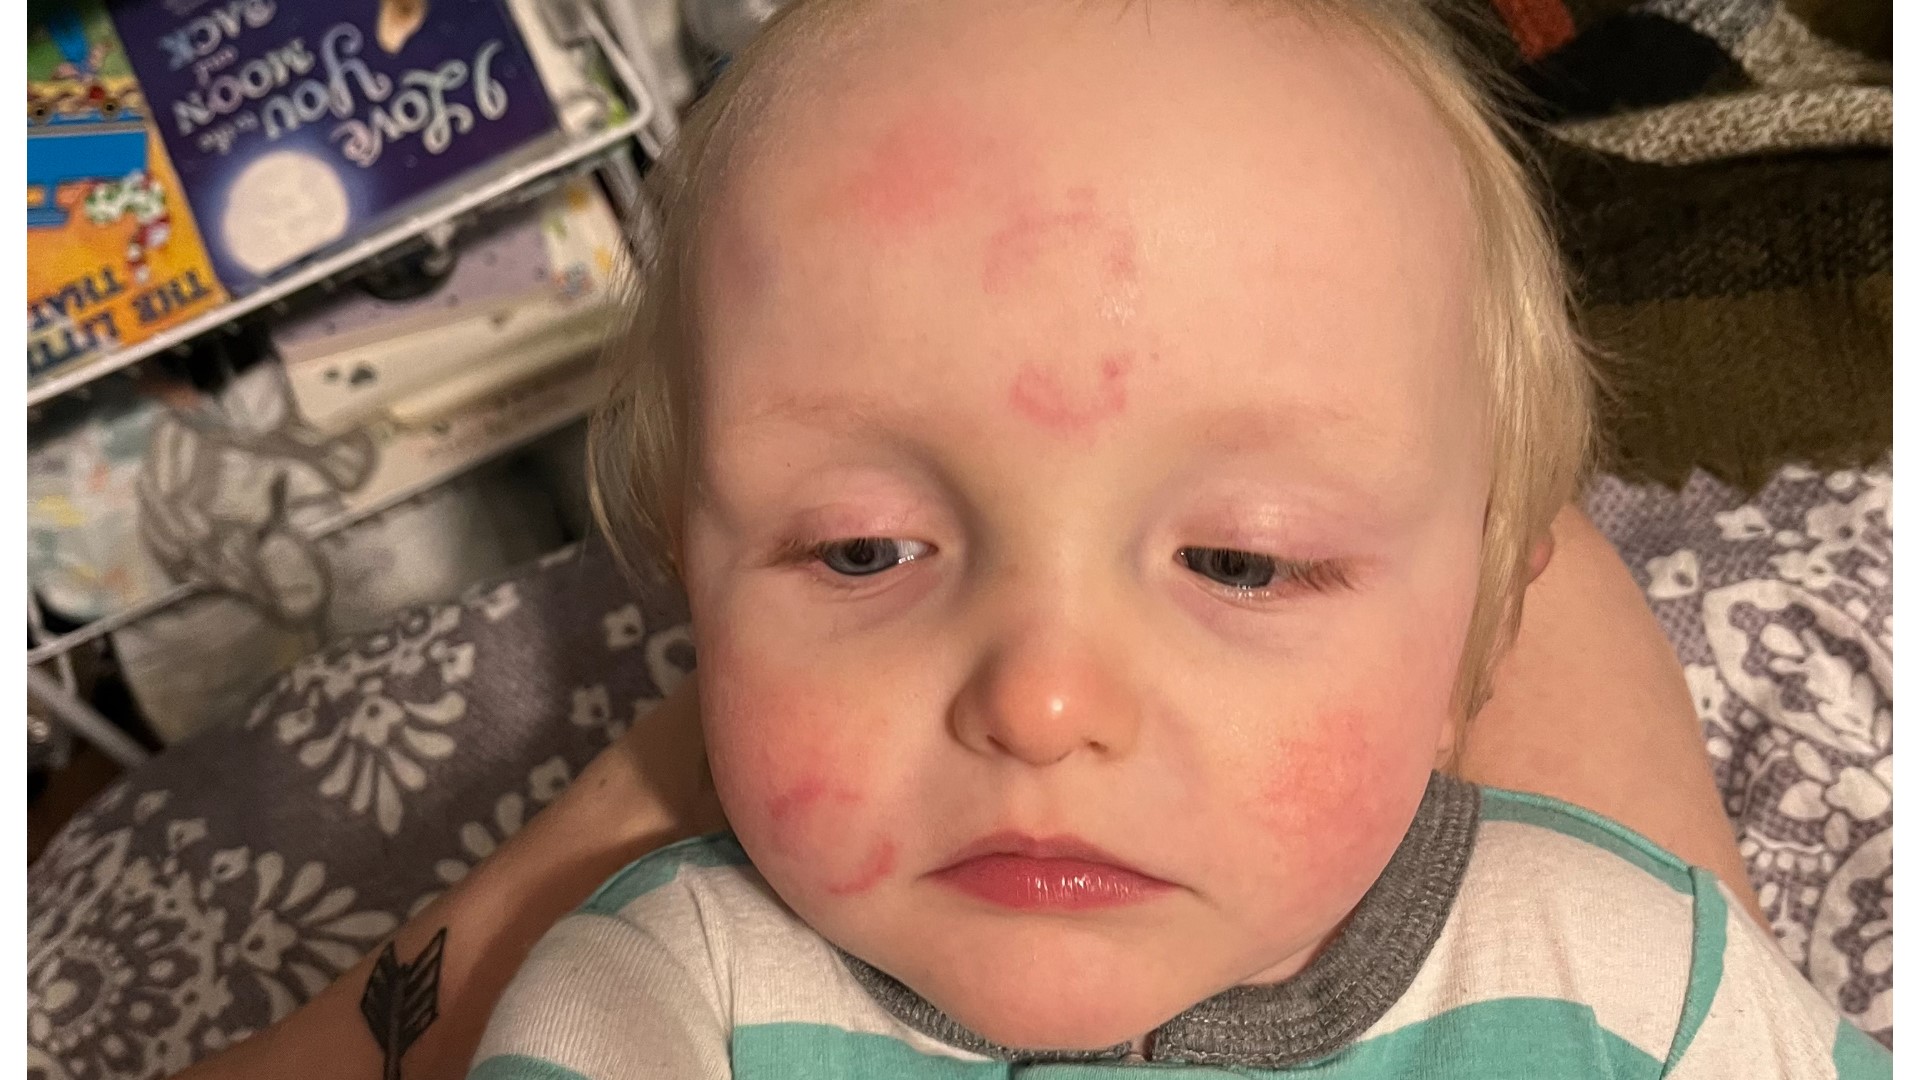 A Clayton County daycare is now under investigation after one-year-old child was bit.